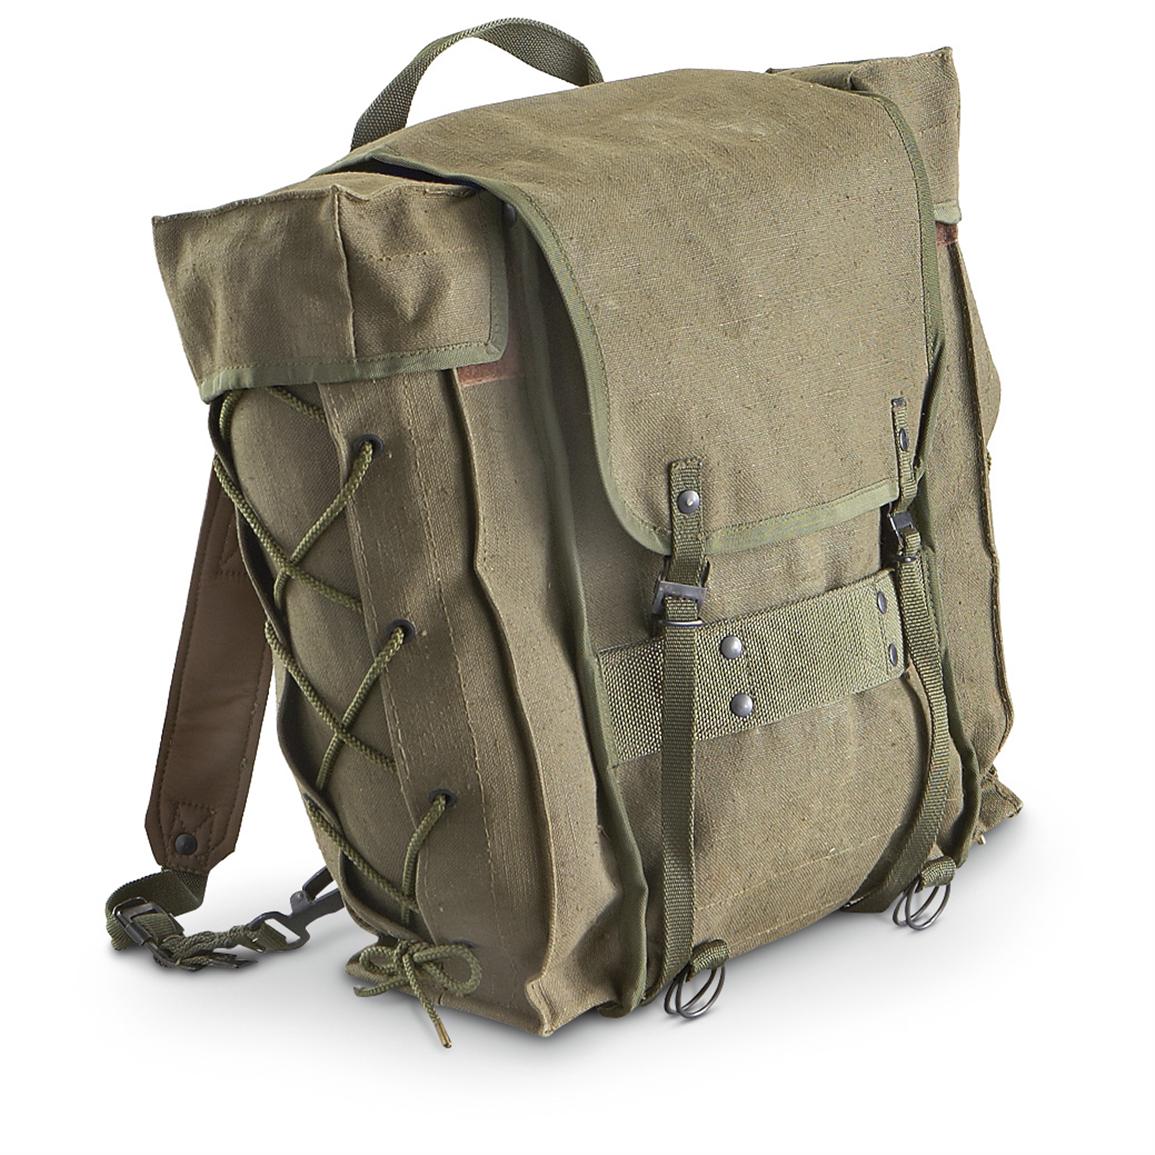 Used Italian Military Tactical Backpack, Olive Drab - 211005, Shoulder & Messenger Bags at ...